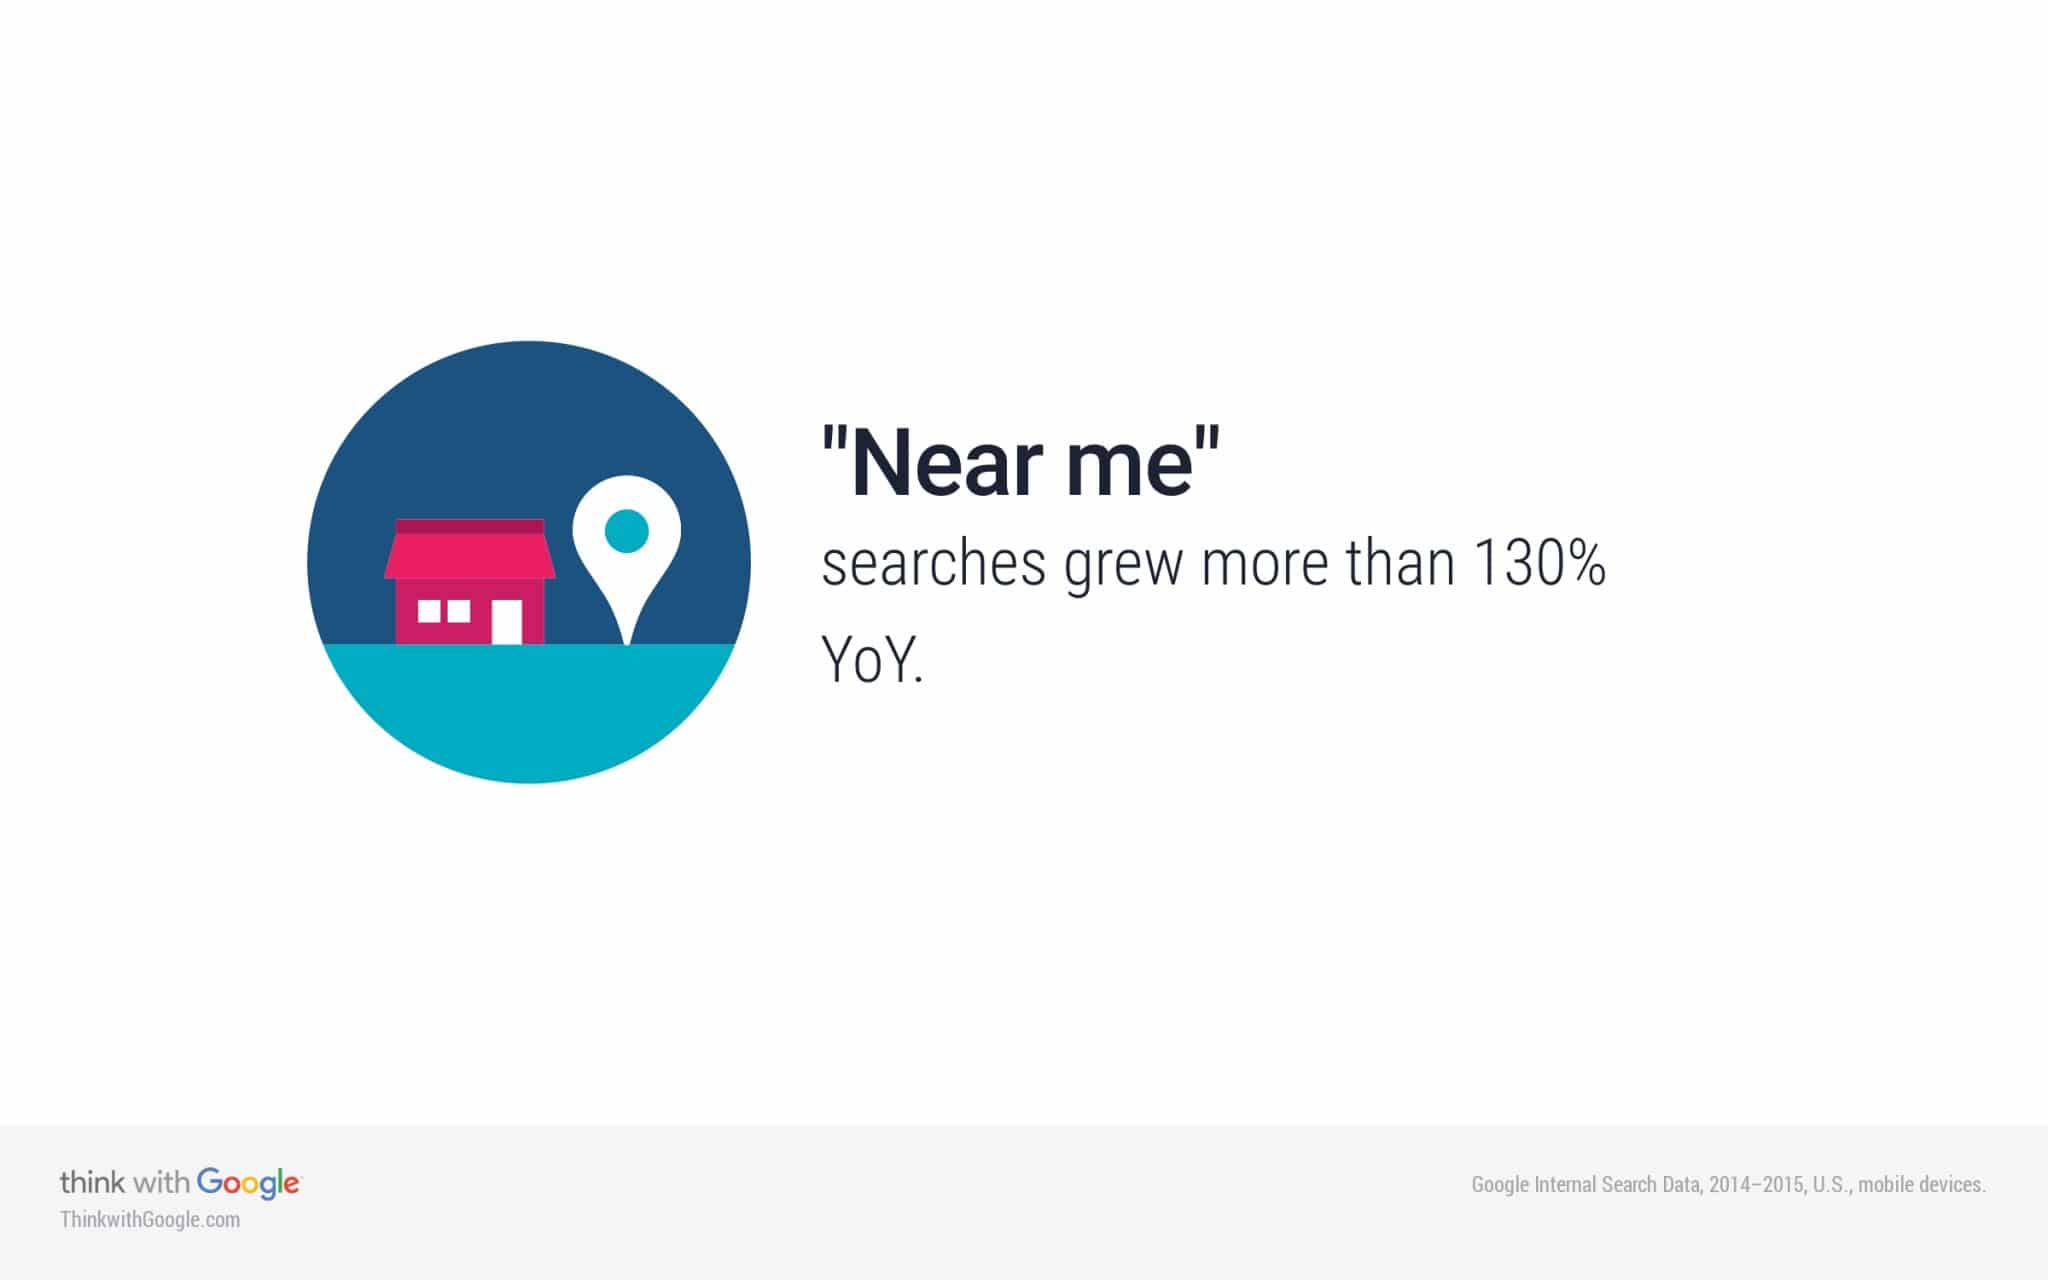 "near me" searches growth - local business SEO